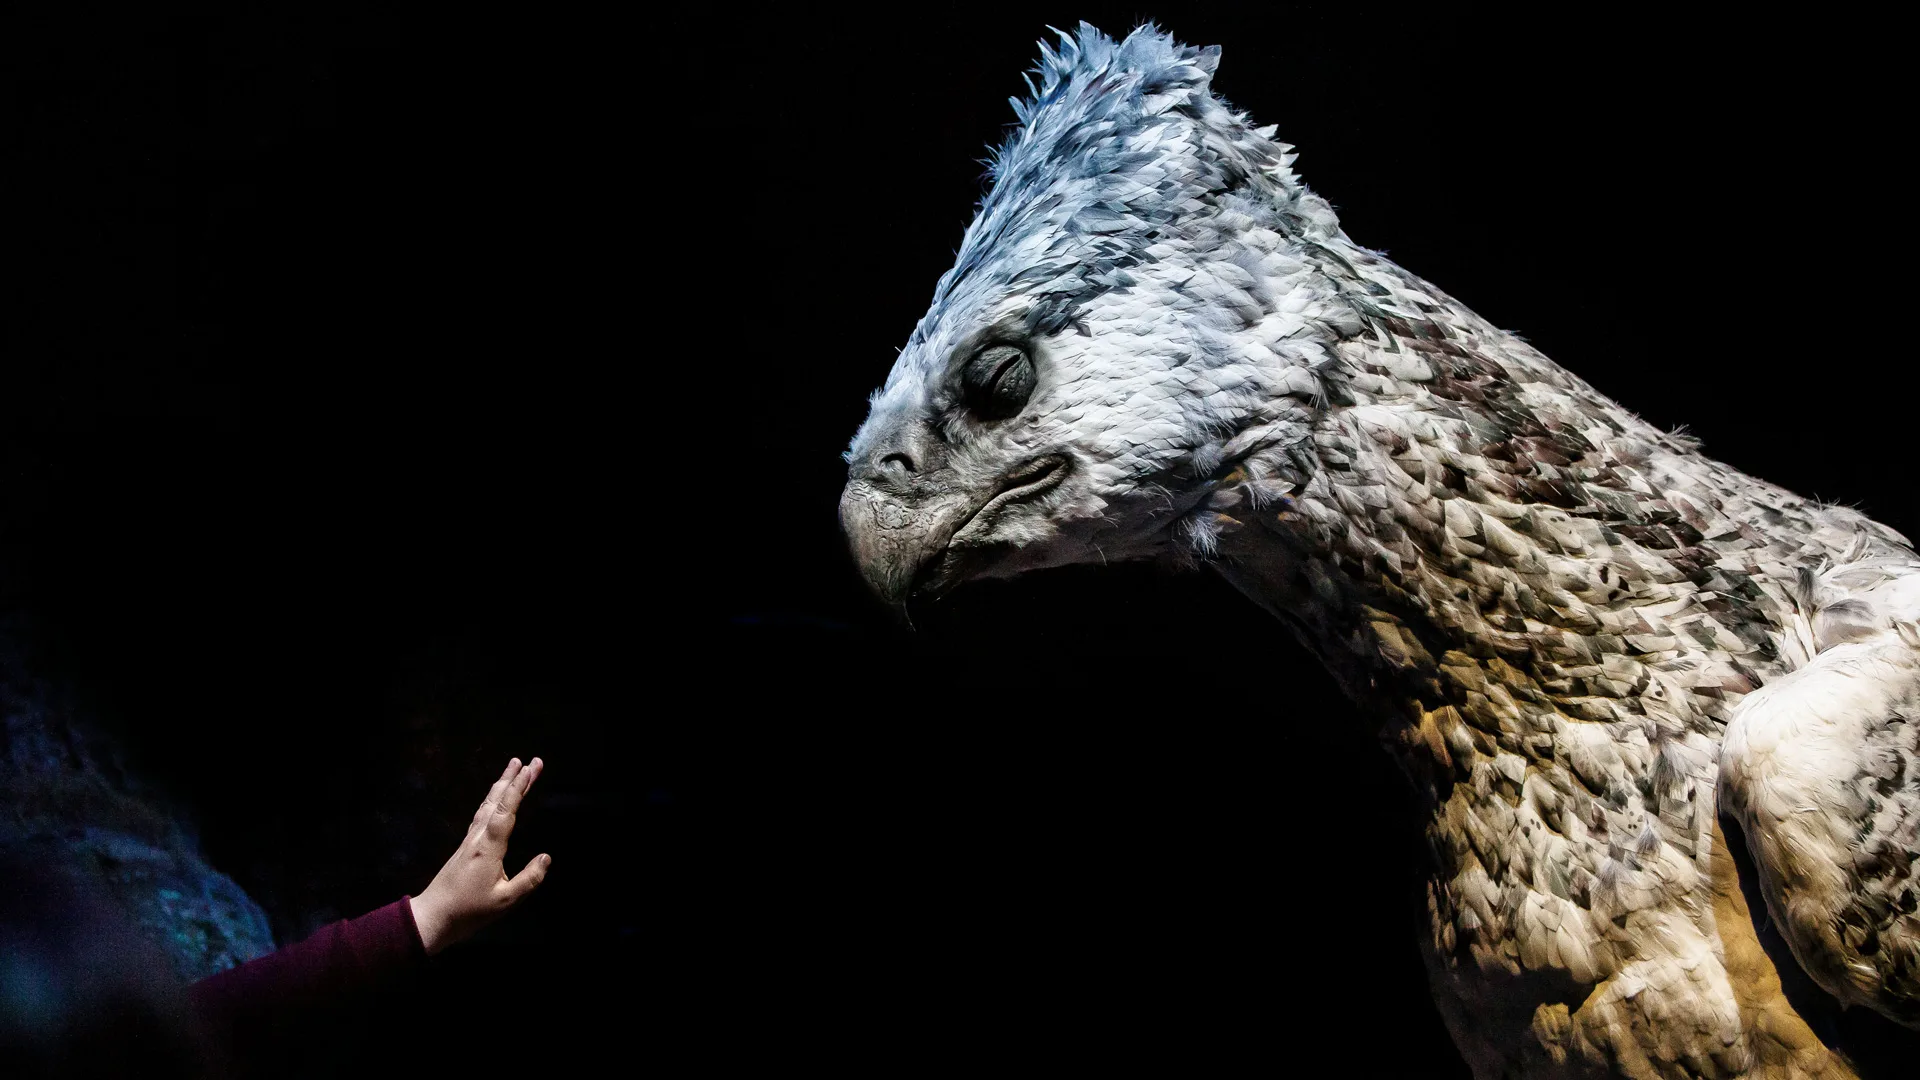 A photo of a hippogriff from Harry Potter with a hand reaching out to touch it against a black background